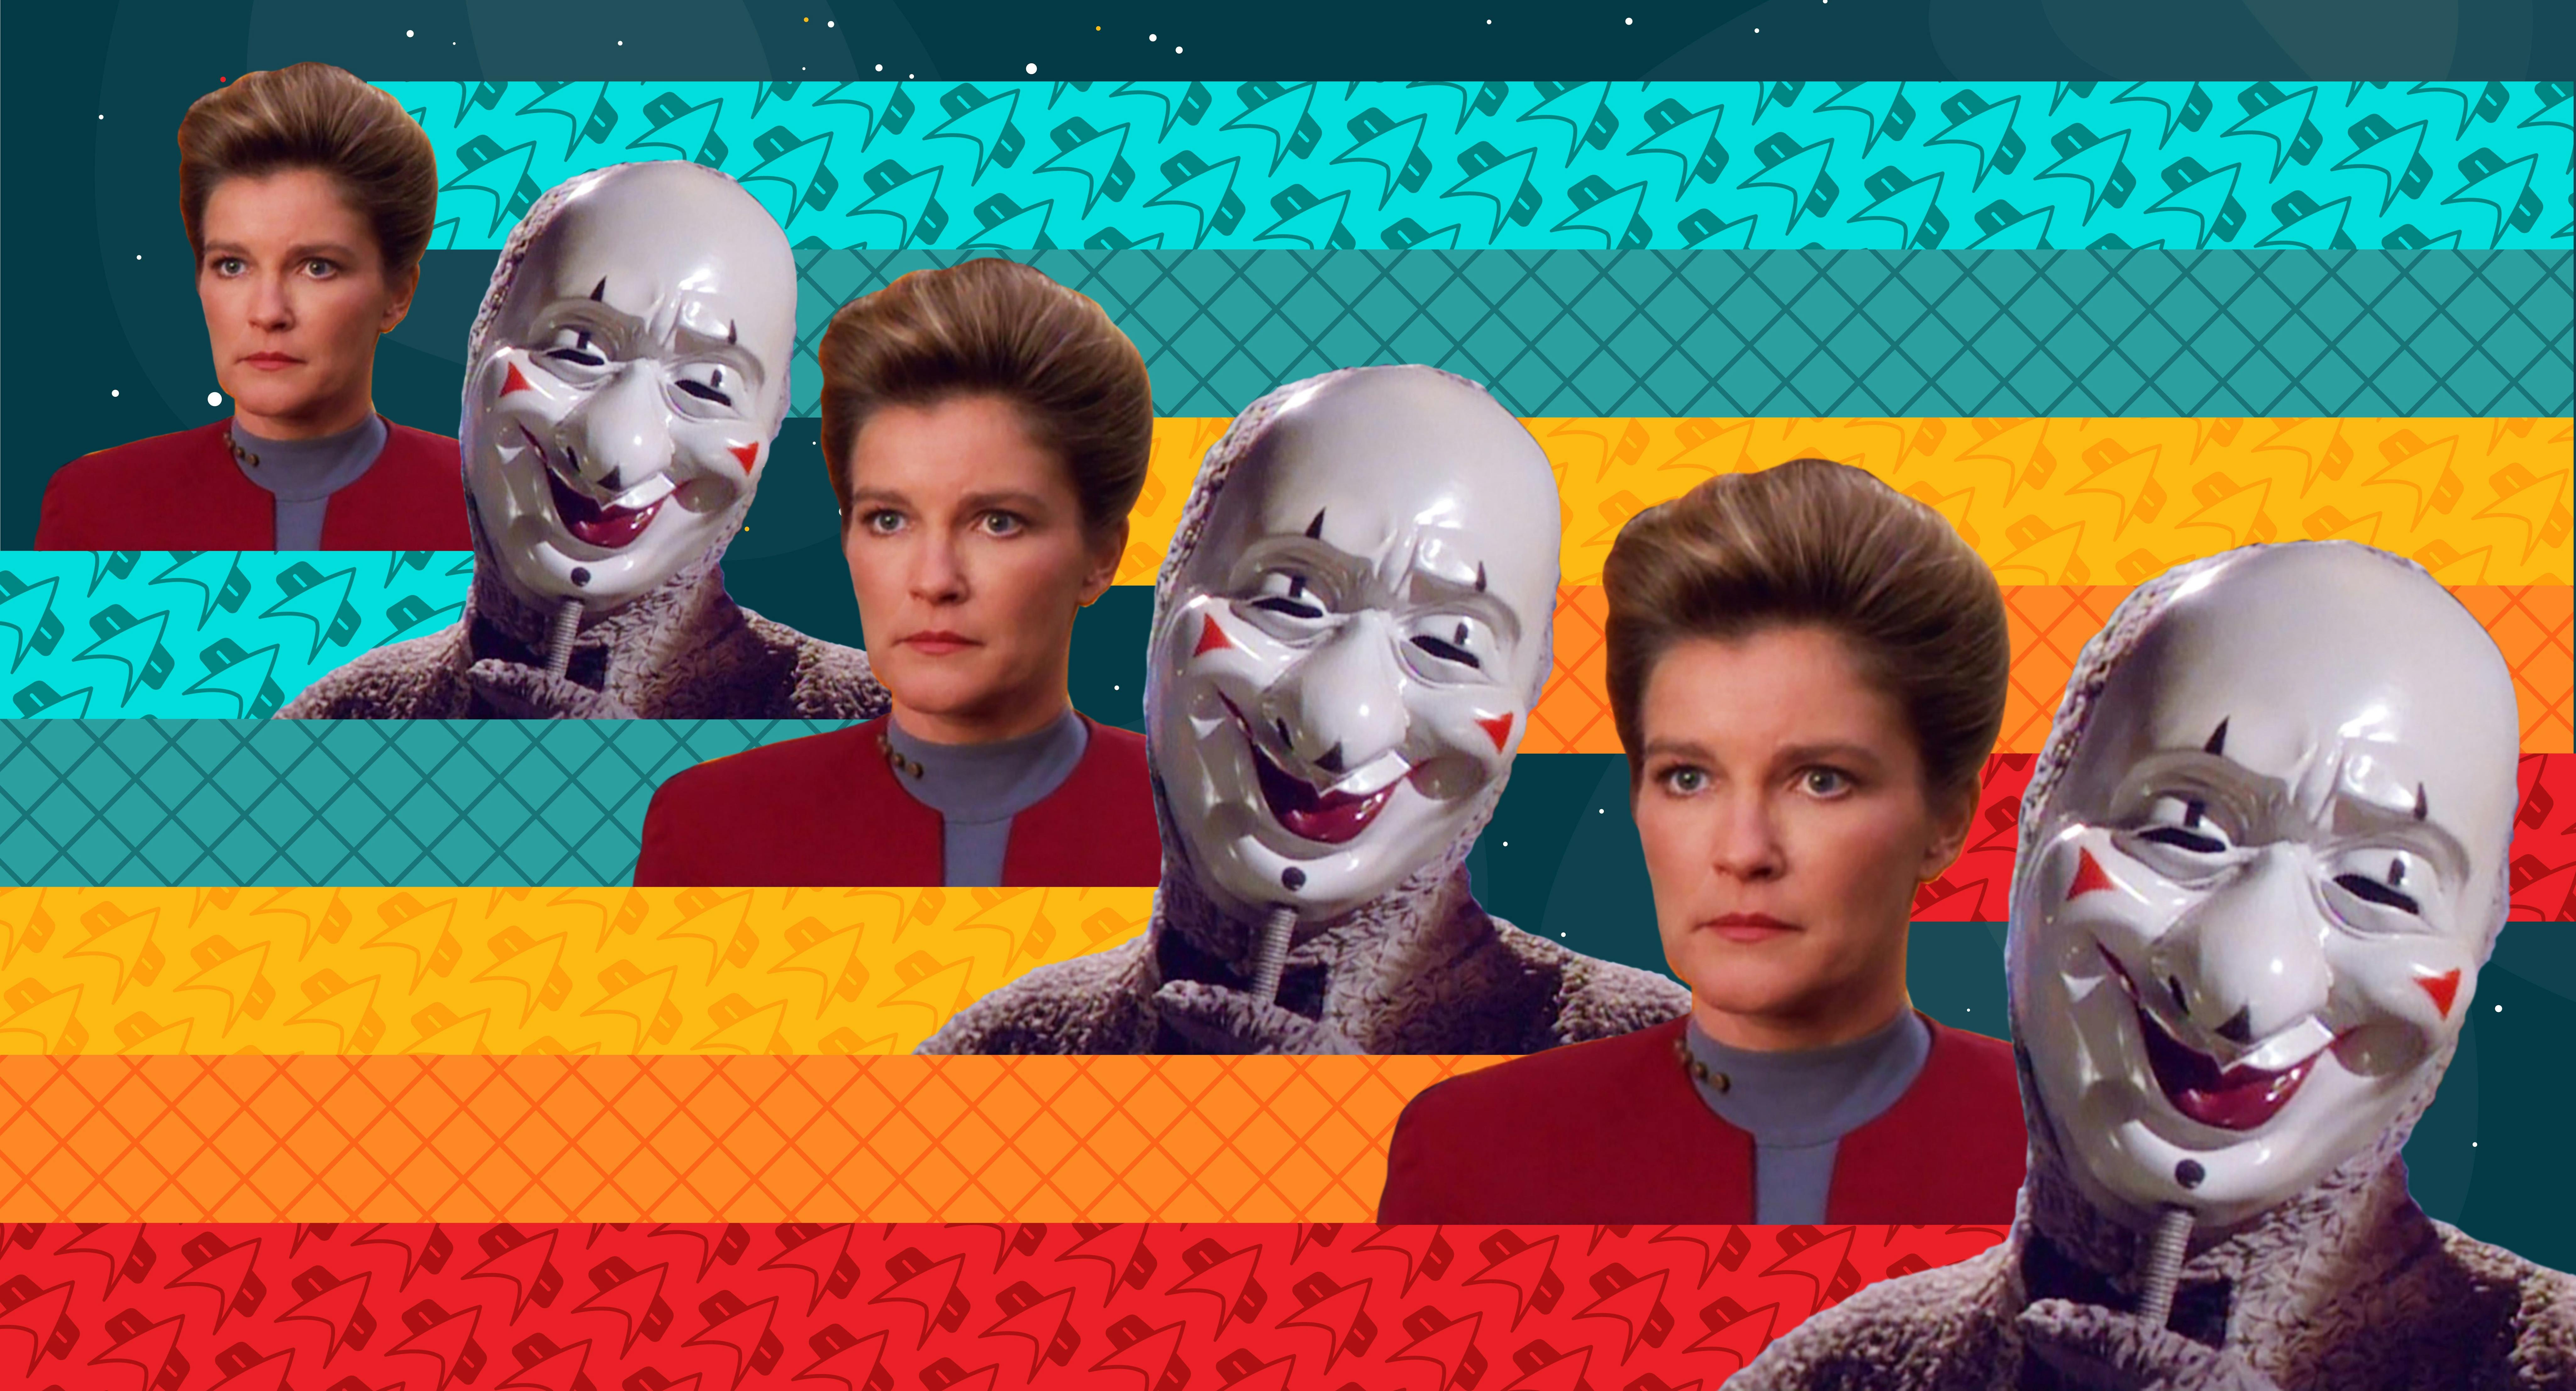 Illustrated banner art for The Clown and Janeway from Star Trek: Voyager's The Thaw